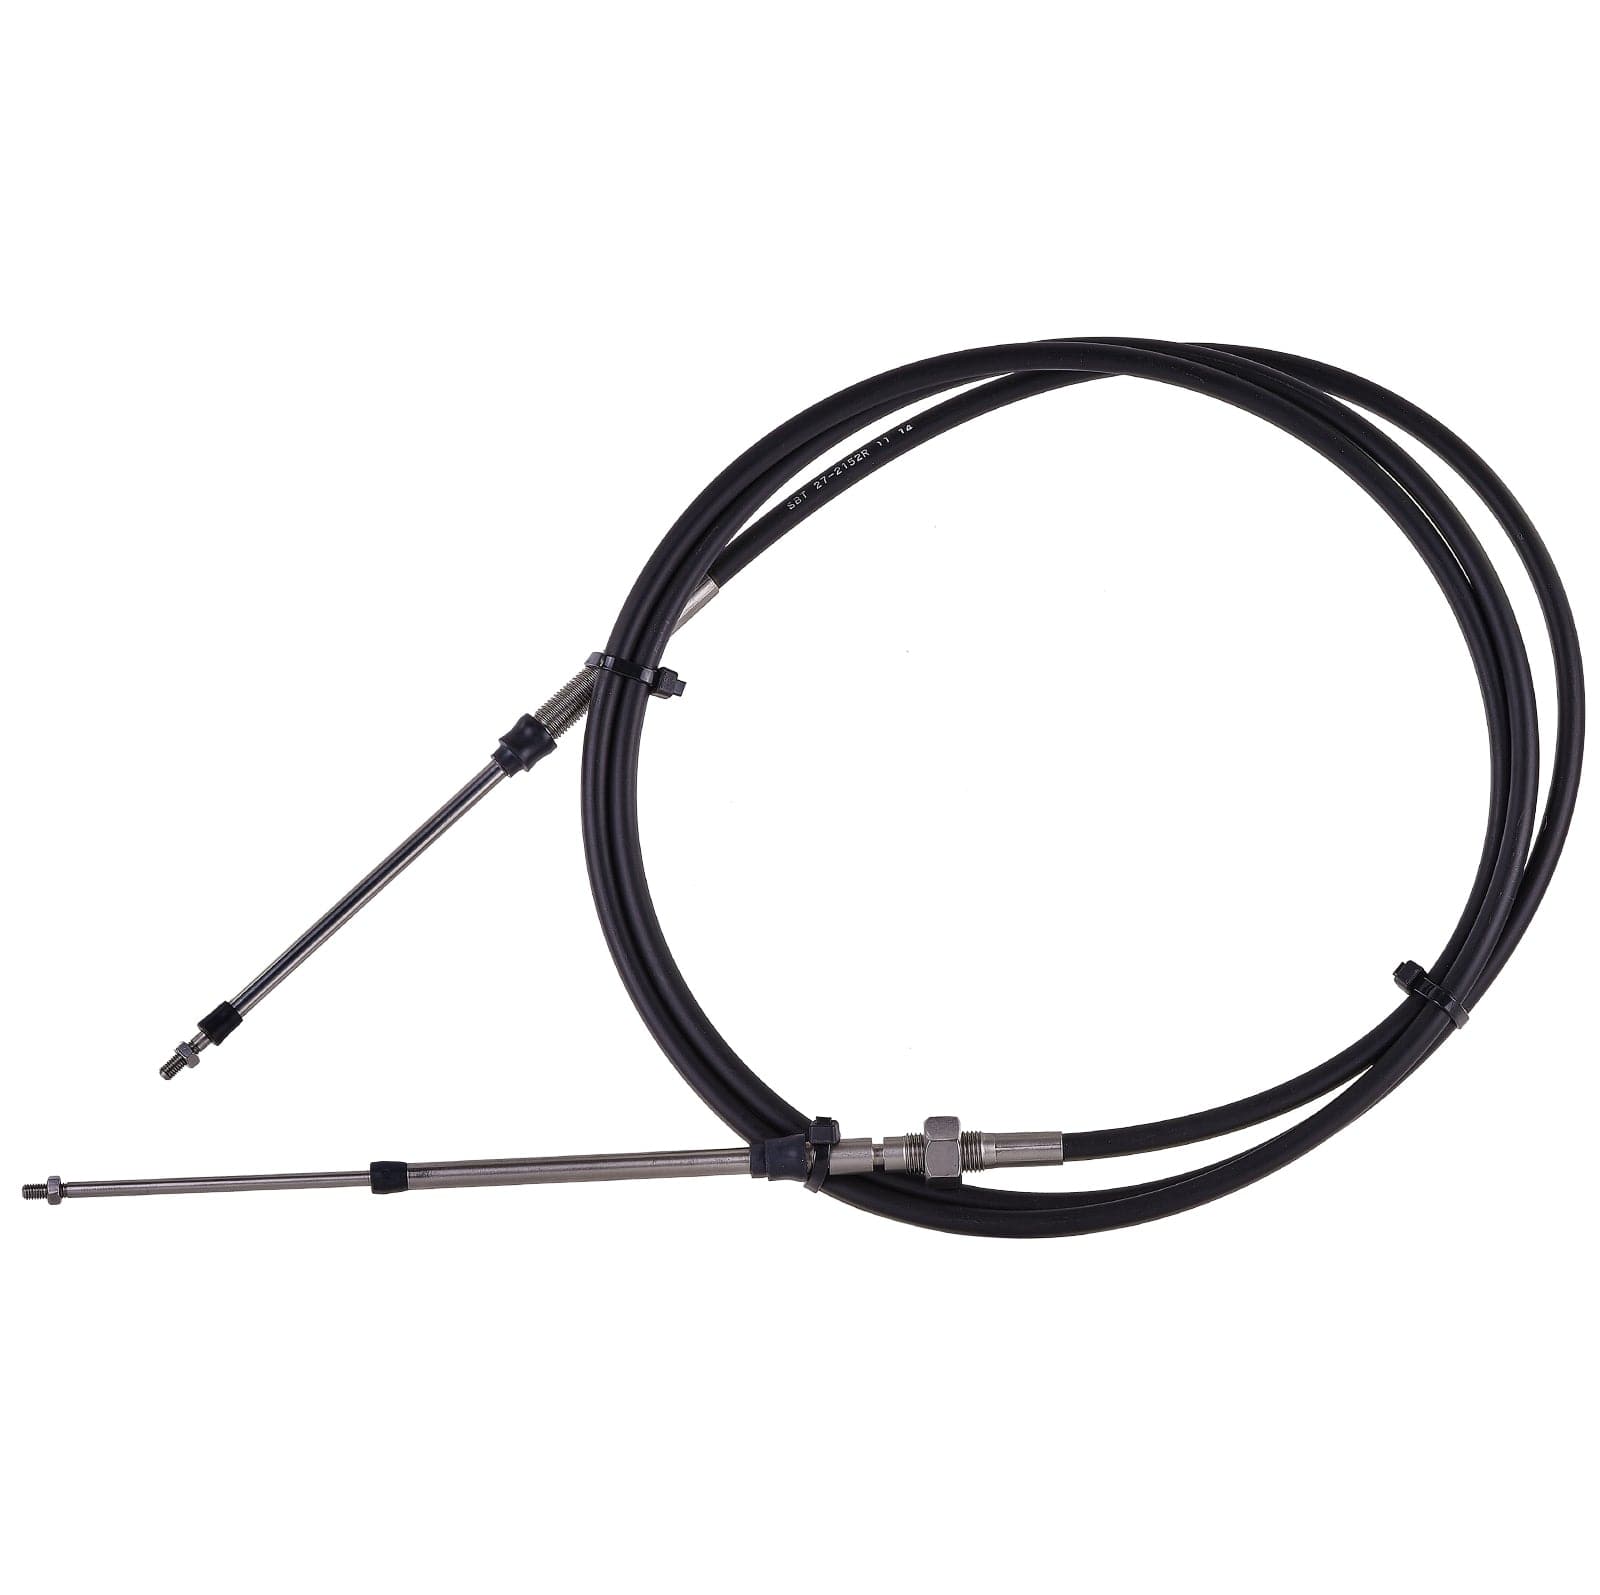 SBT Jet Boat Reverse / Shift Cable for Sea-Doo Sportster 1800 (Right) 204170059 1998 1999